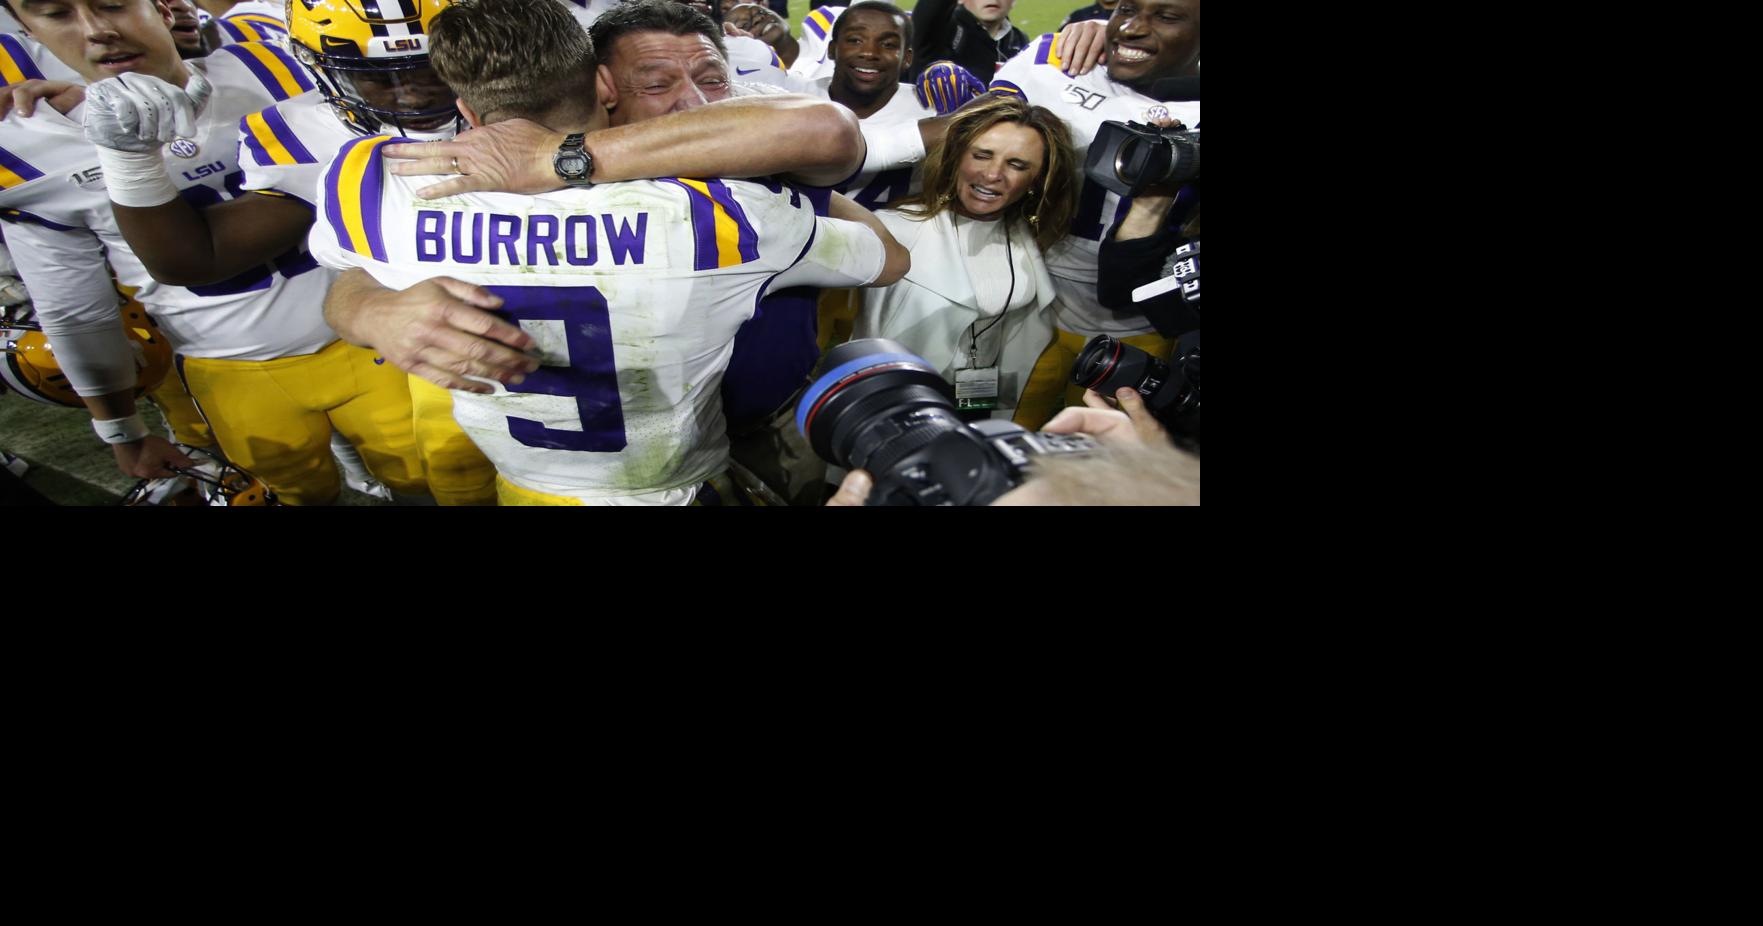 Joe Burrow already trying to get the LSU band back together with